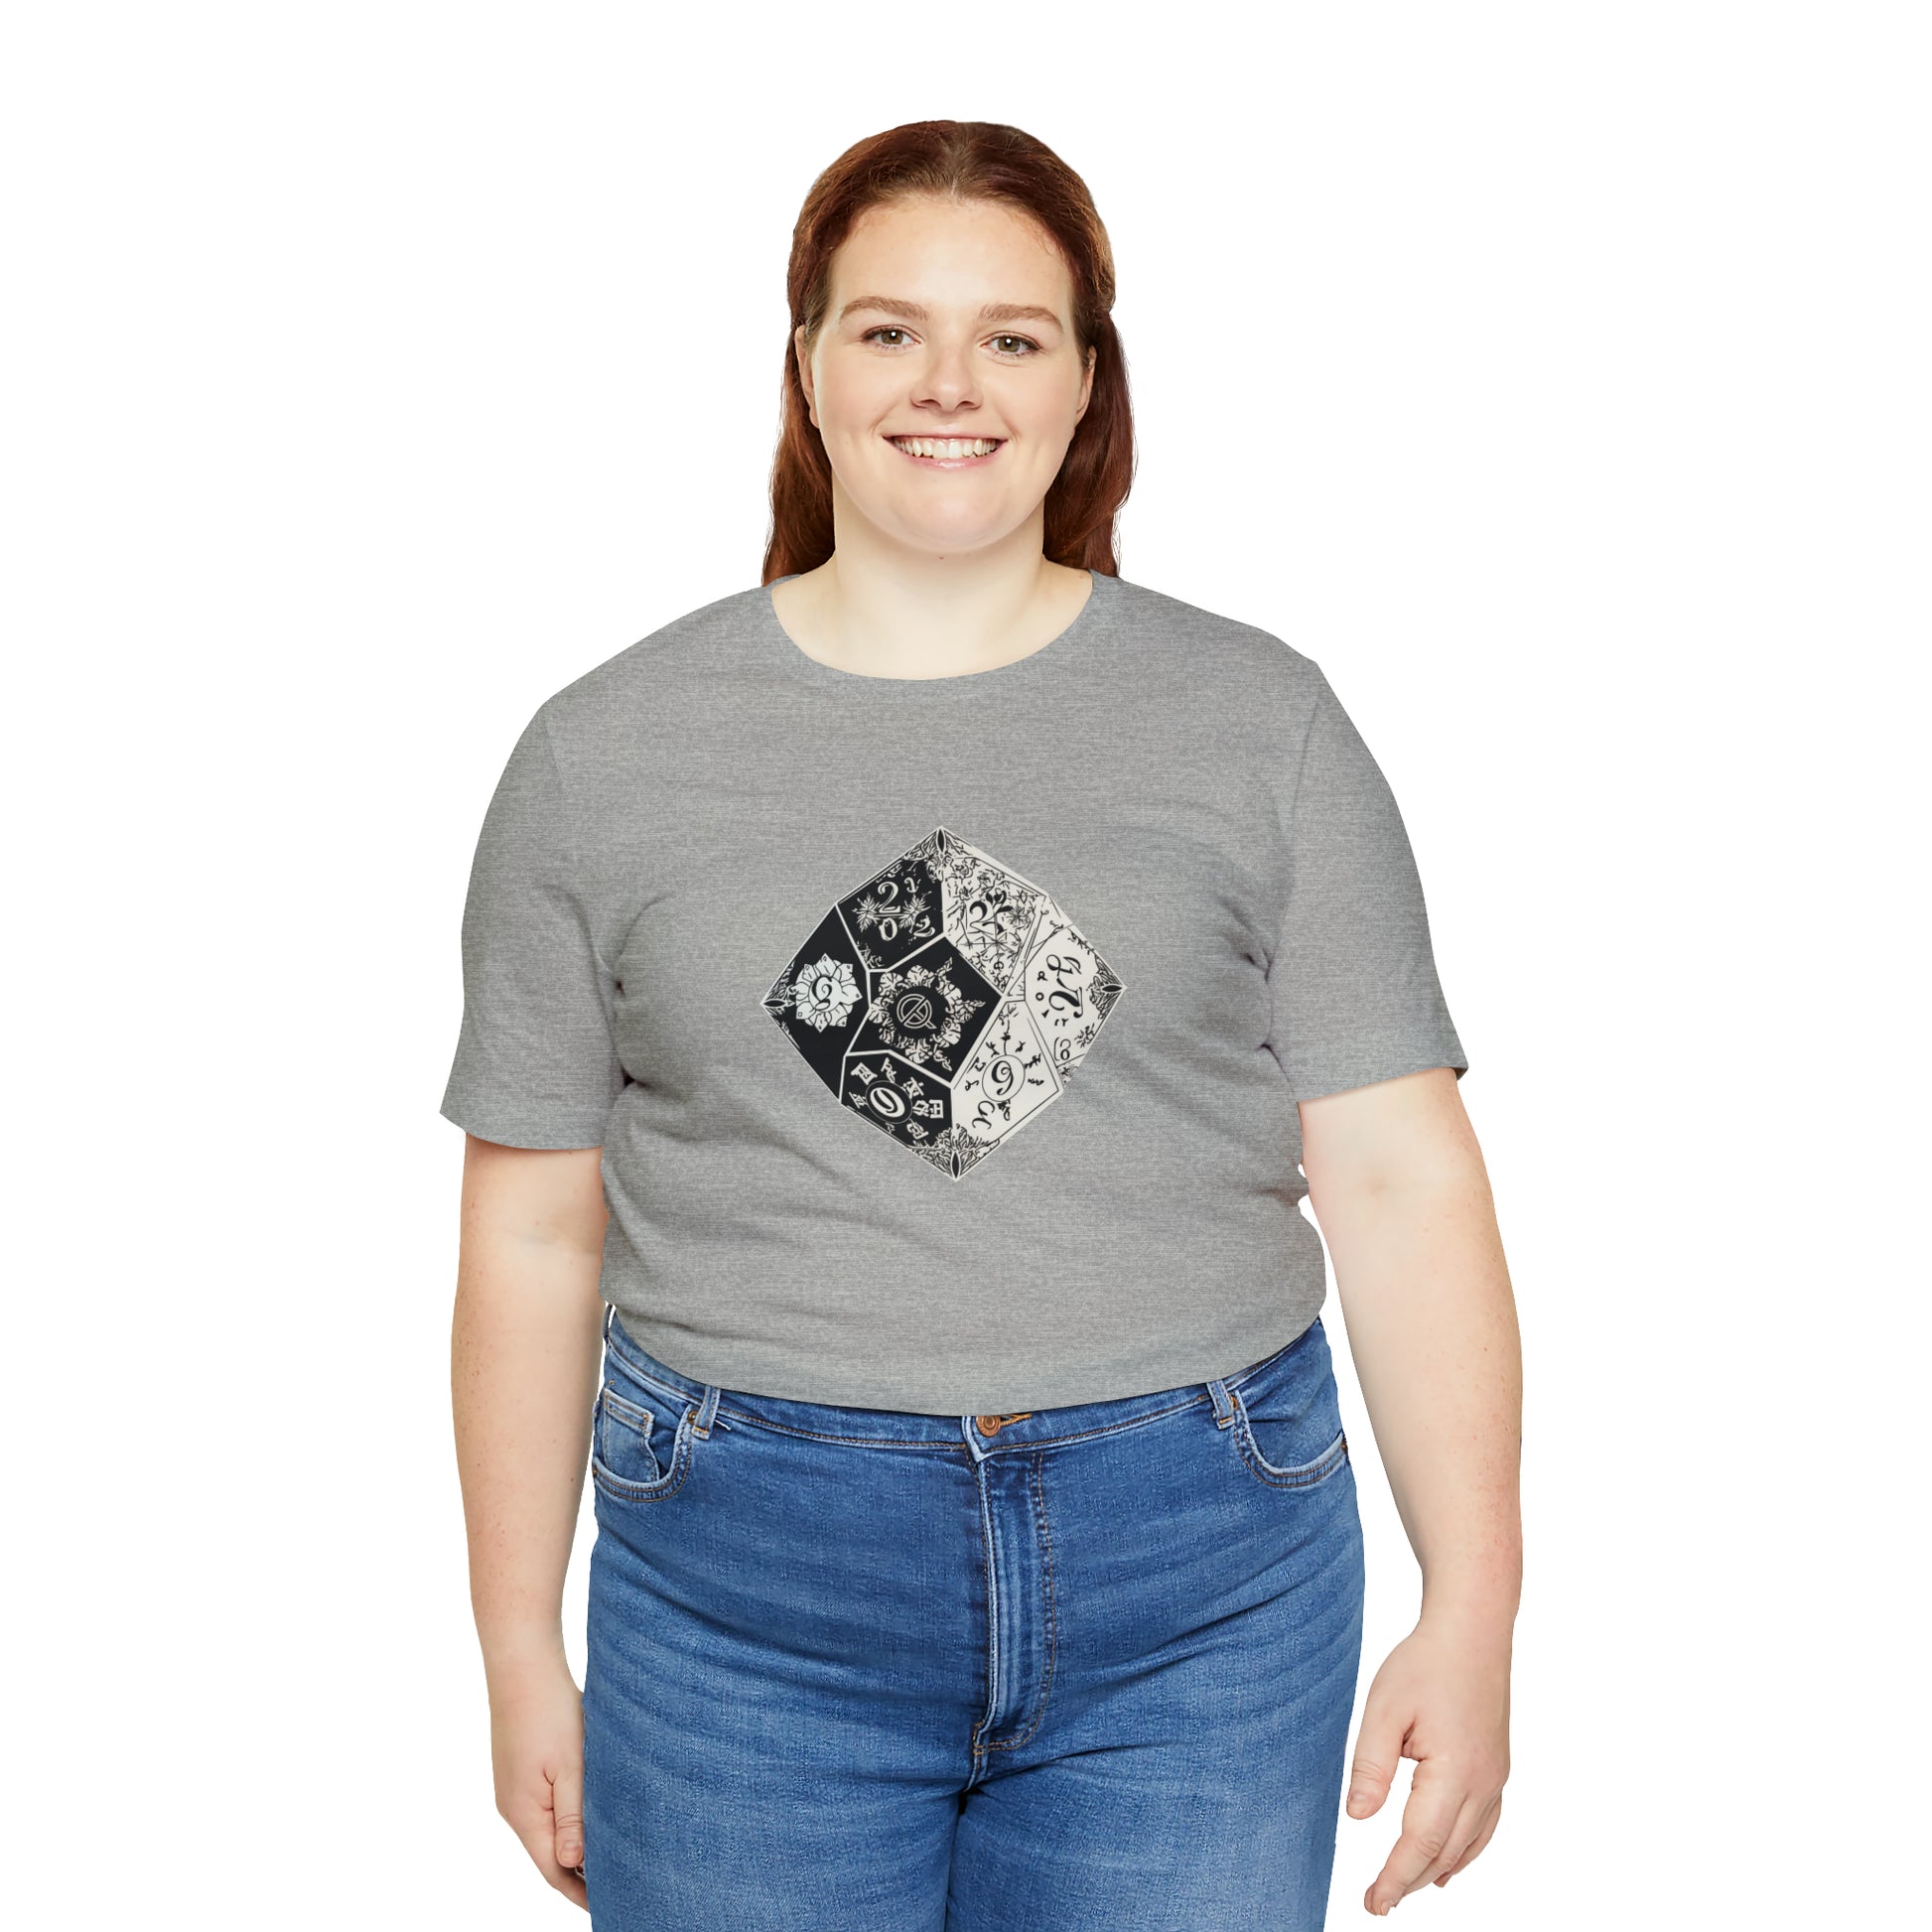 athletic-heather-quest-thread-tee-shirt-with-large-black-and-white-artistic-dice-on-center